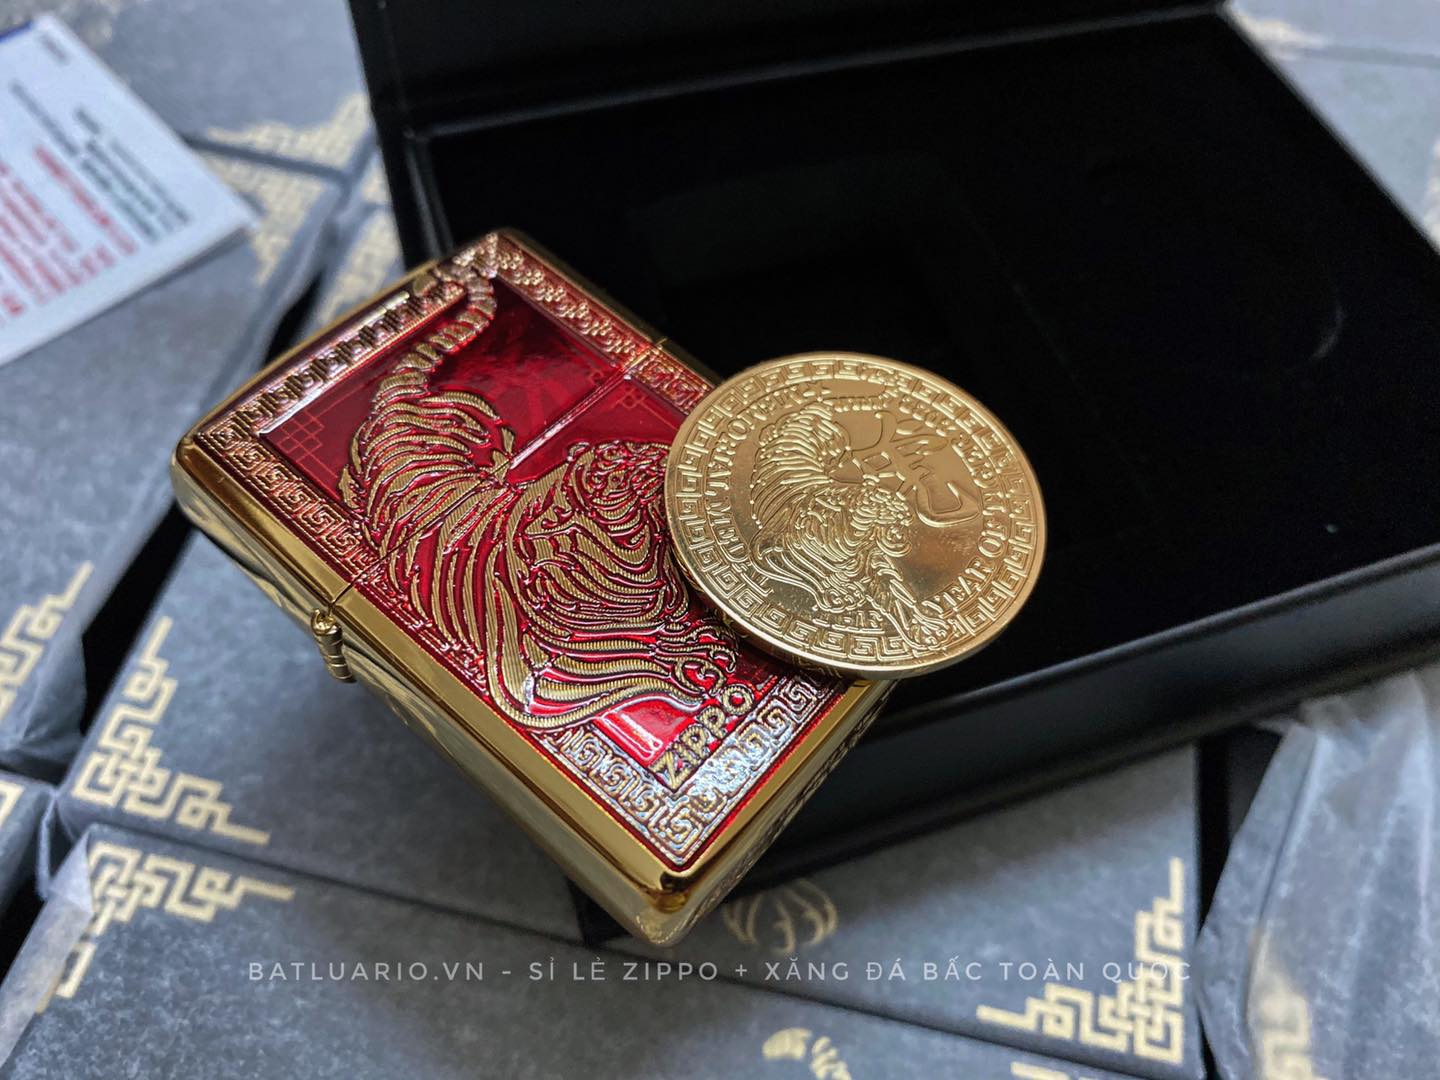 Zippo CZA-2-24 – Zippo Year of the Tiger 2022 Asian Limited Edition 12